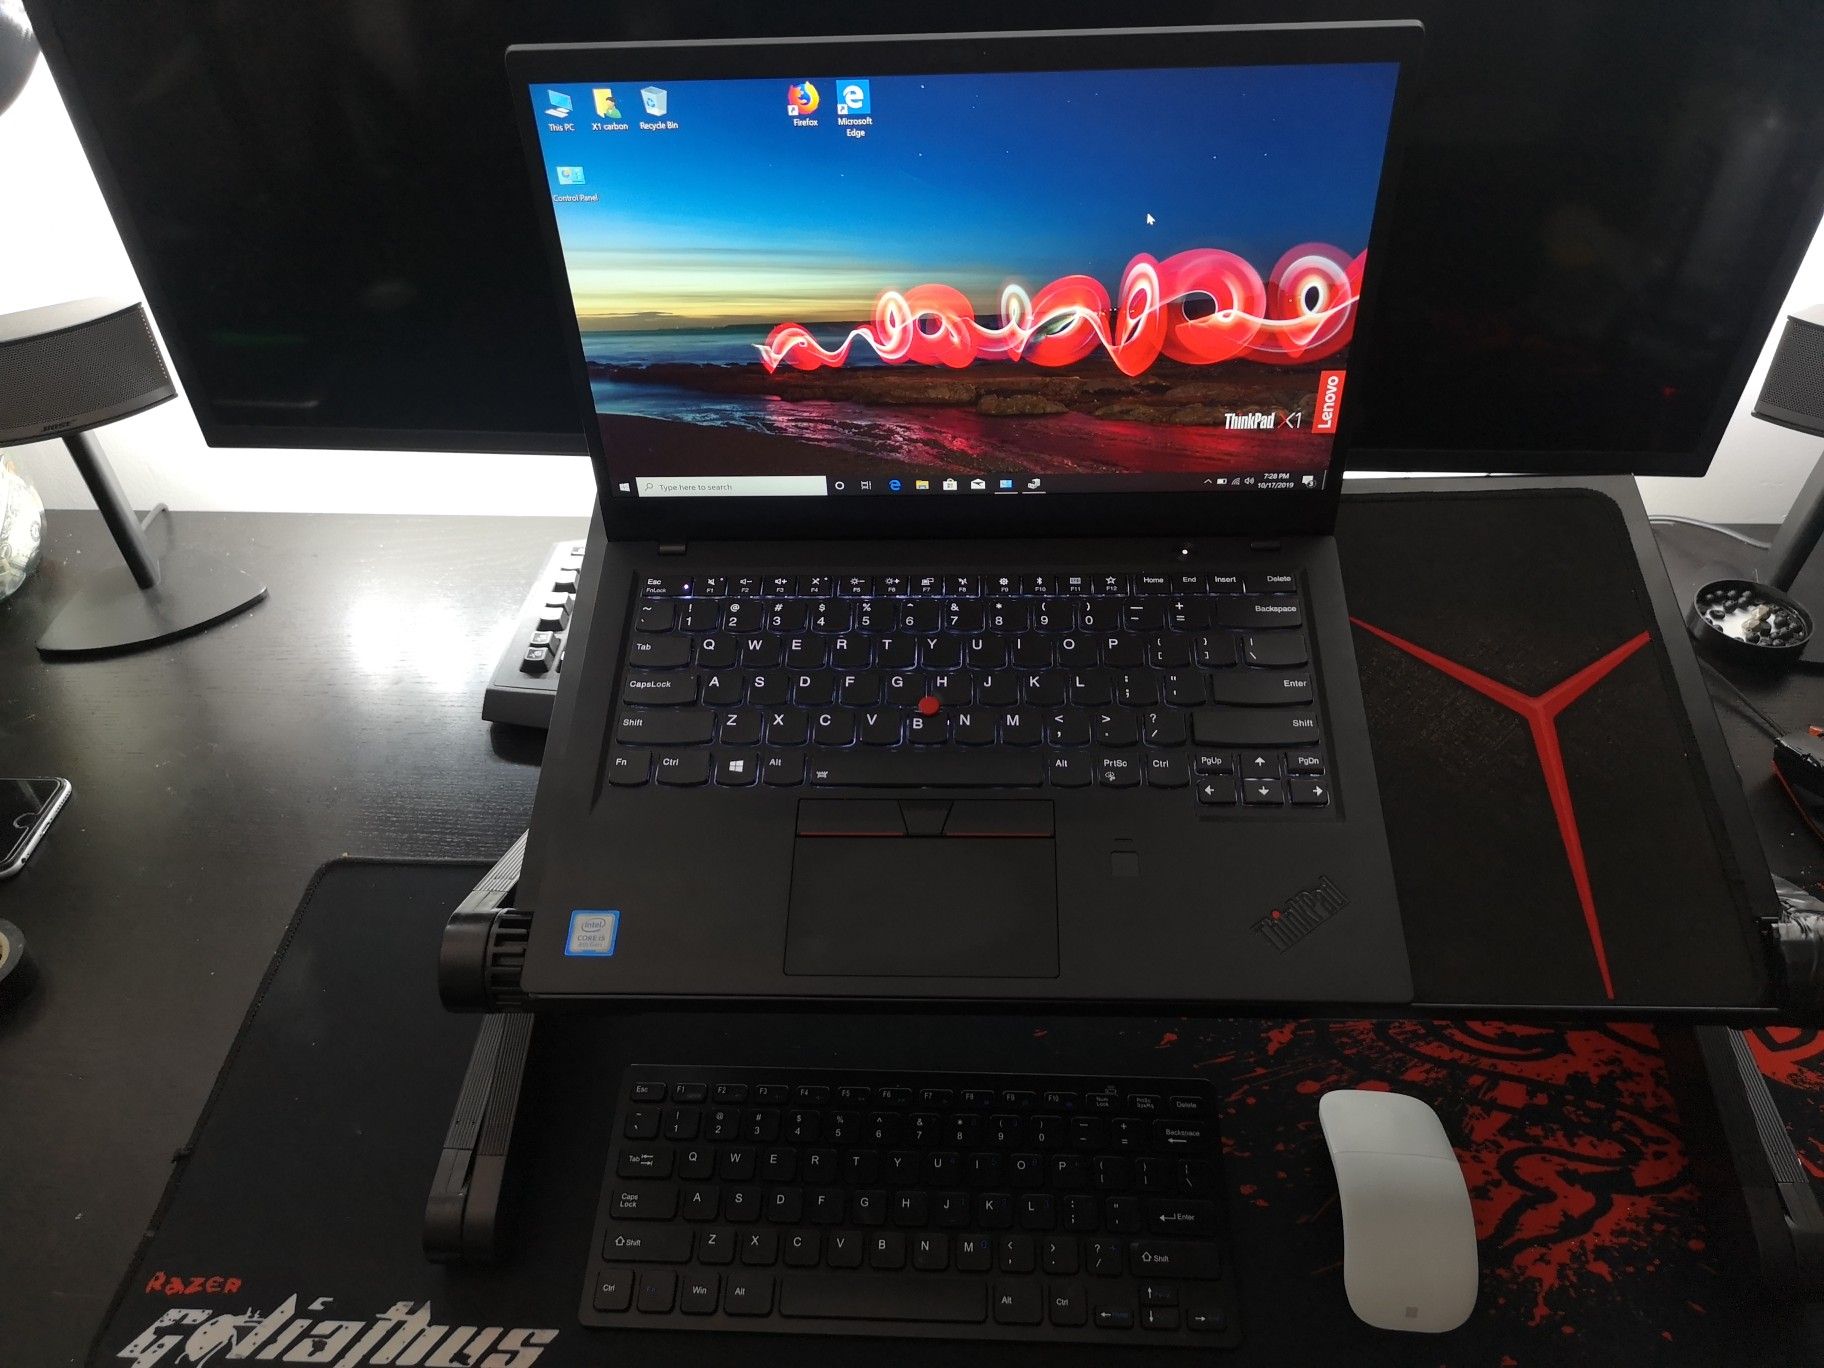 Lenovo X1 Carbon 6th gen, i5 8th gen + laptop stand, mouse and pad, keyboard like new